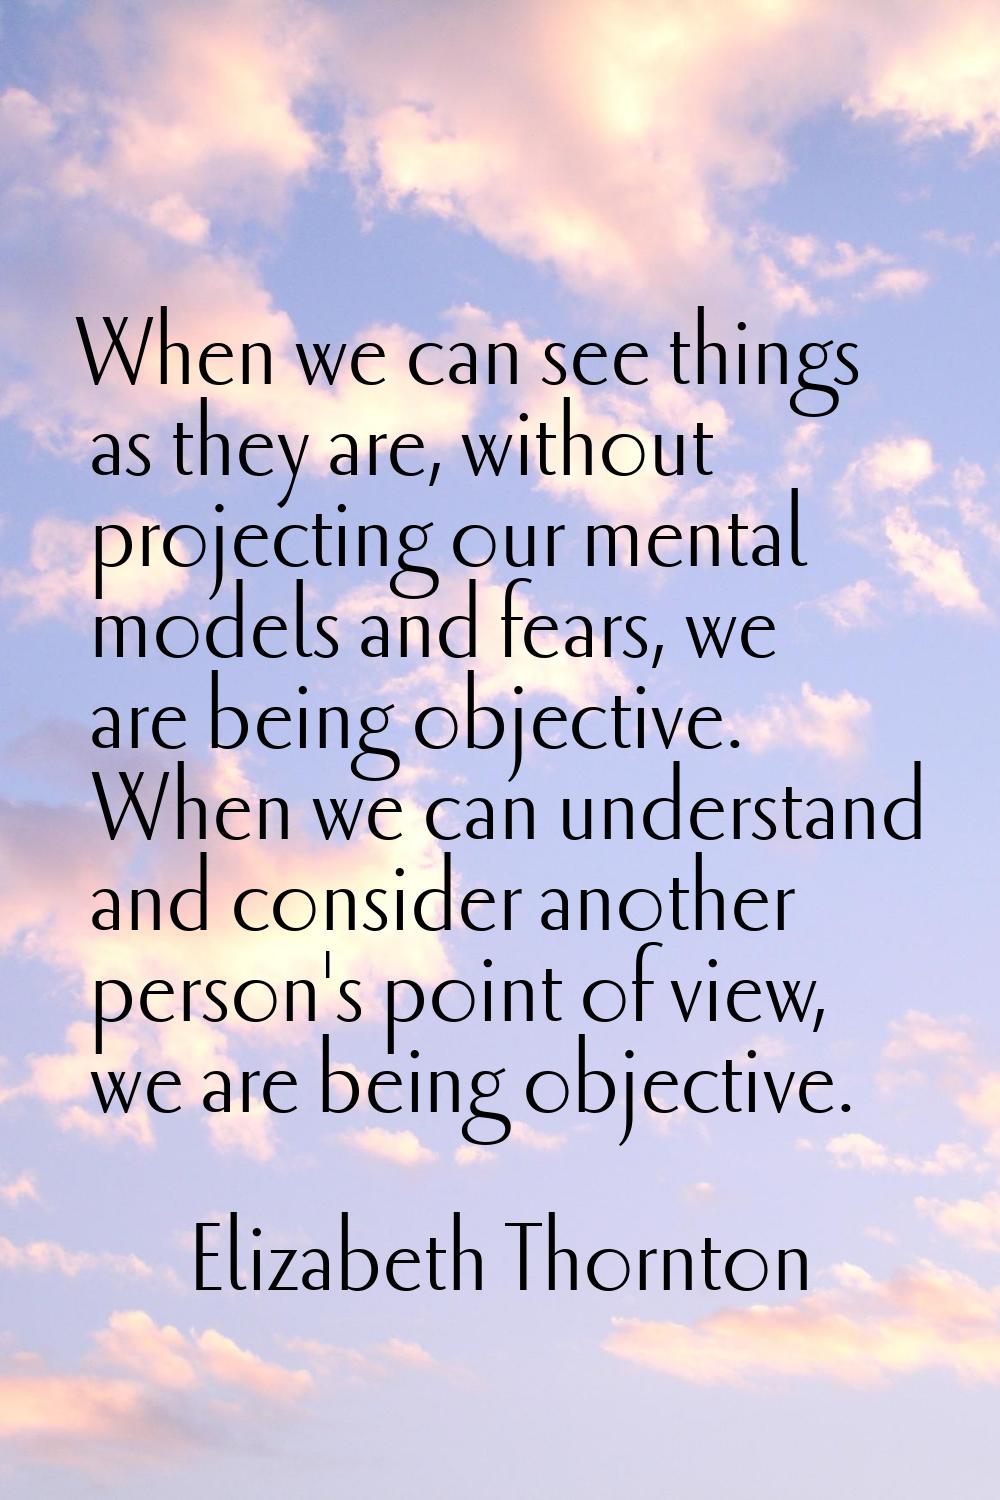 When we can see things as they are, without projecting our mental models and fears, we are being ob